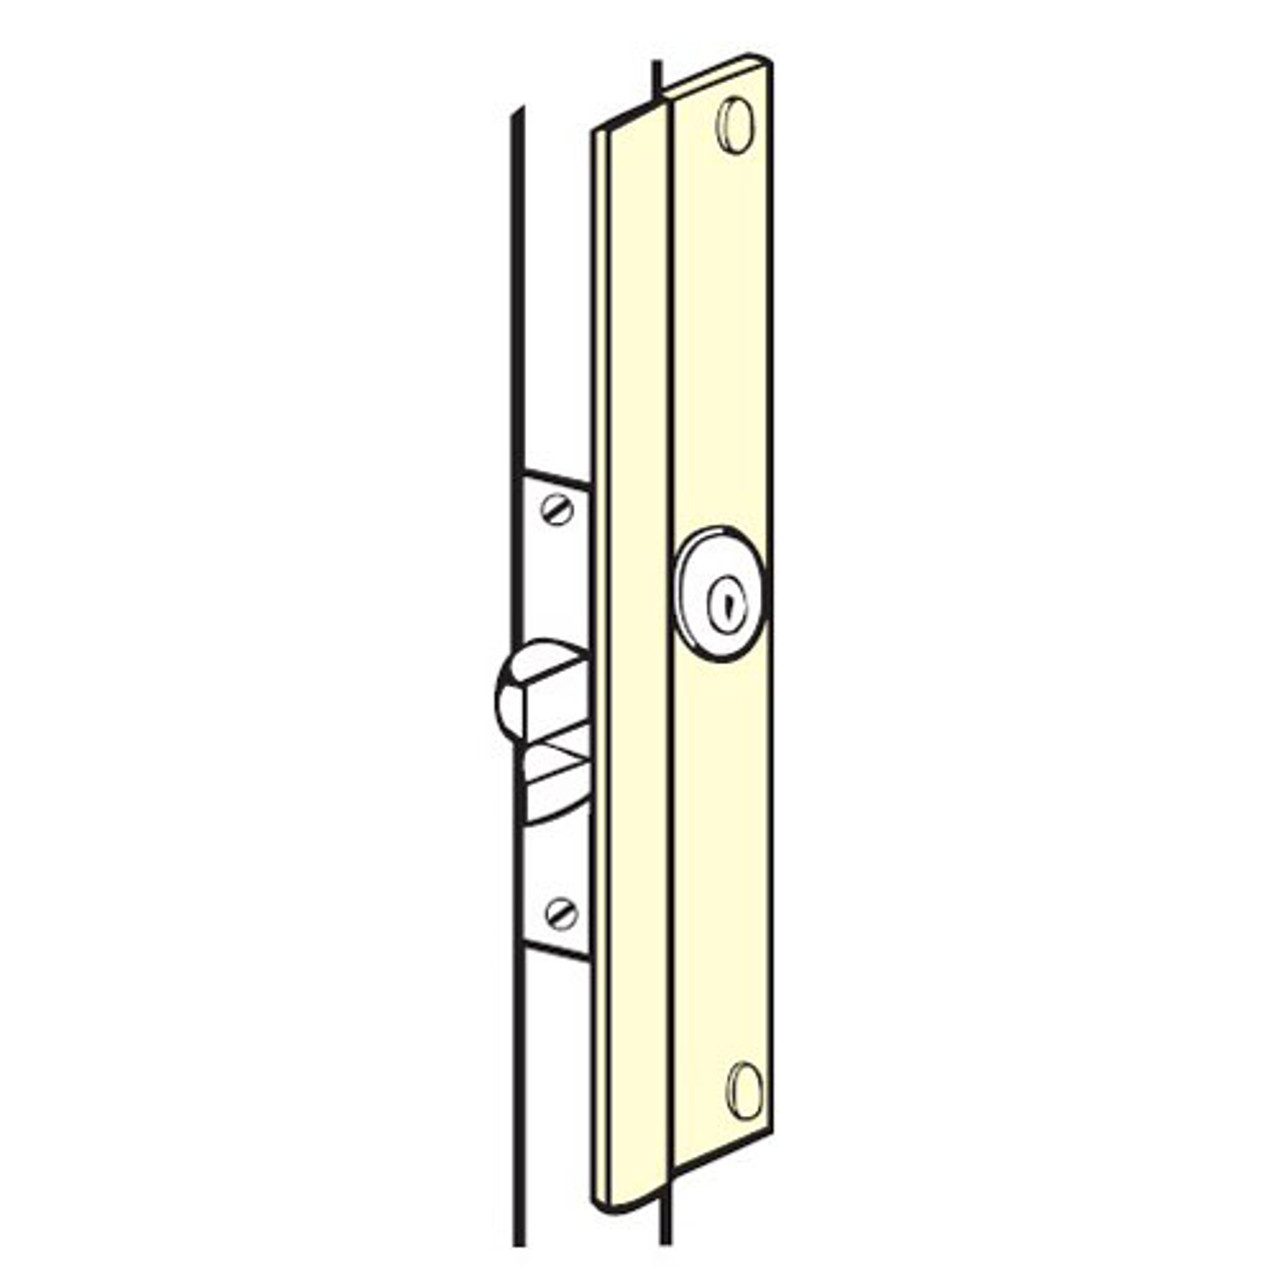 LP-312P-DU Don Jo Latch Protector in Duro Coated Finish